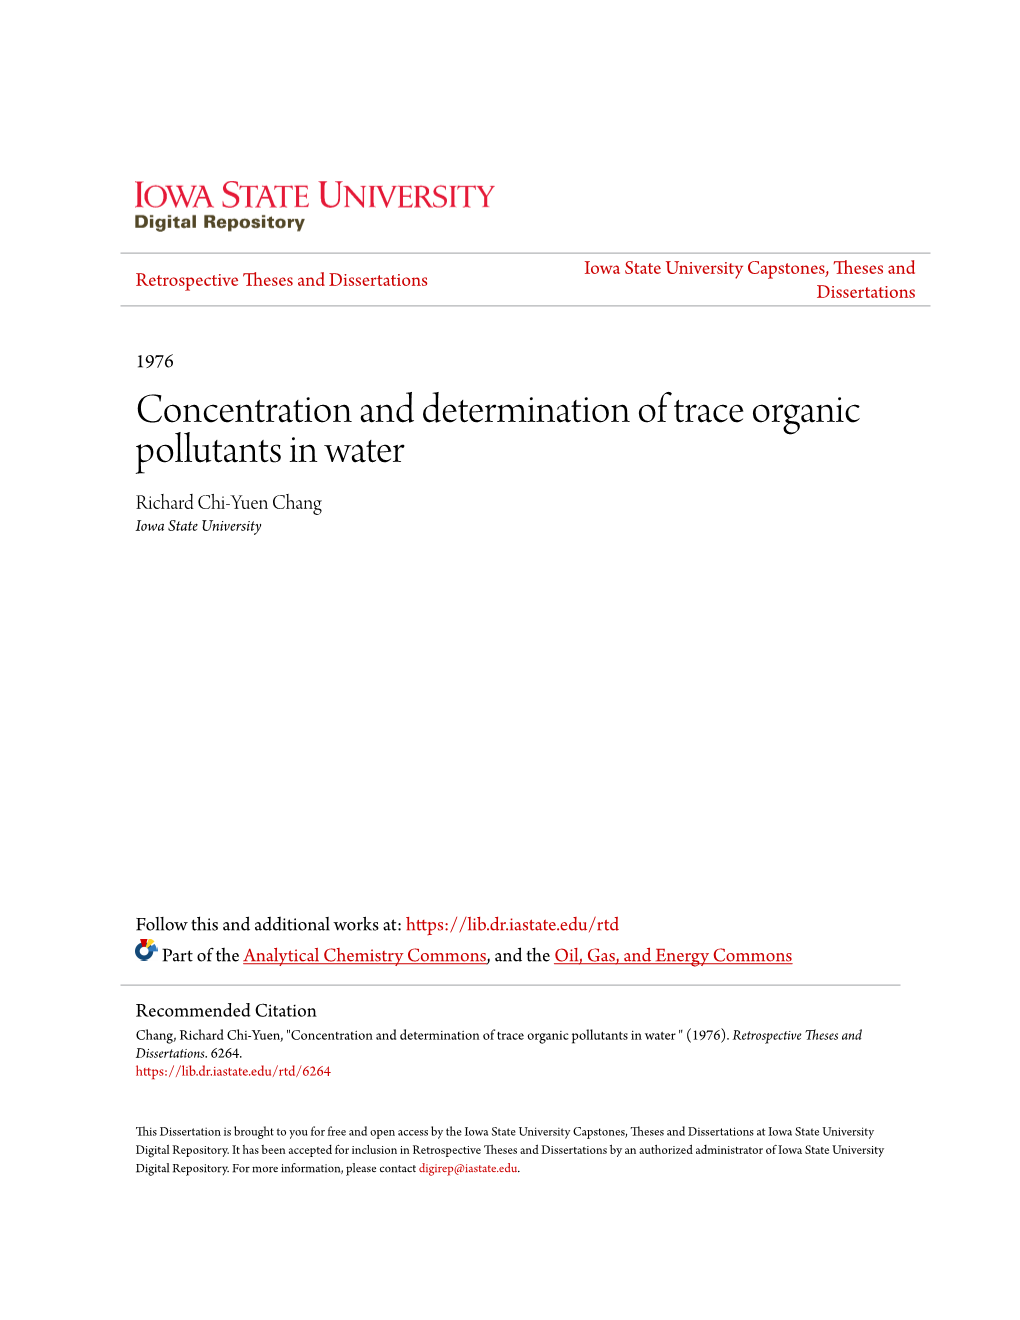 Concentration and Determination of Trace Organic Pollutants in Water Richard Chi-Yuen Chang Iowa State University